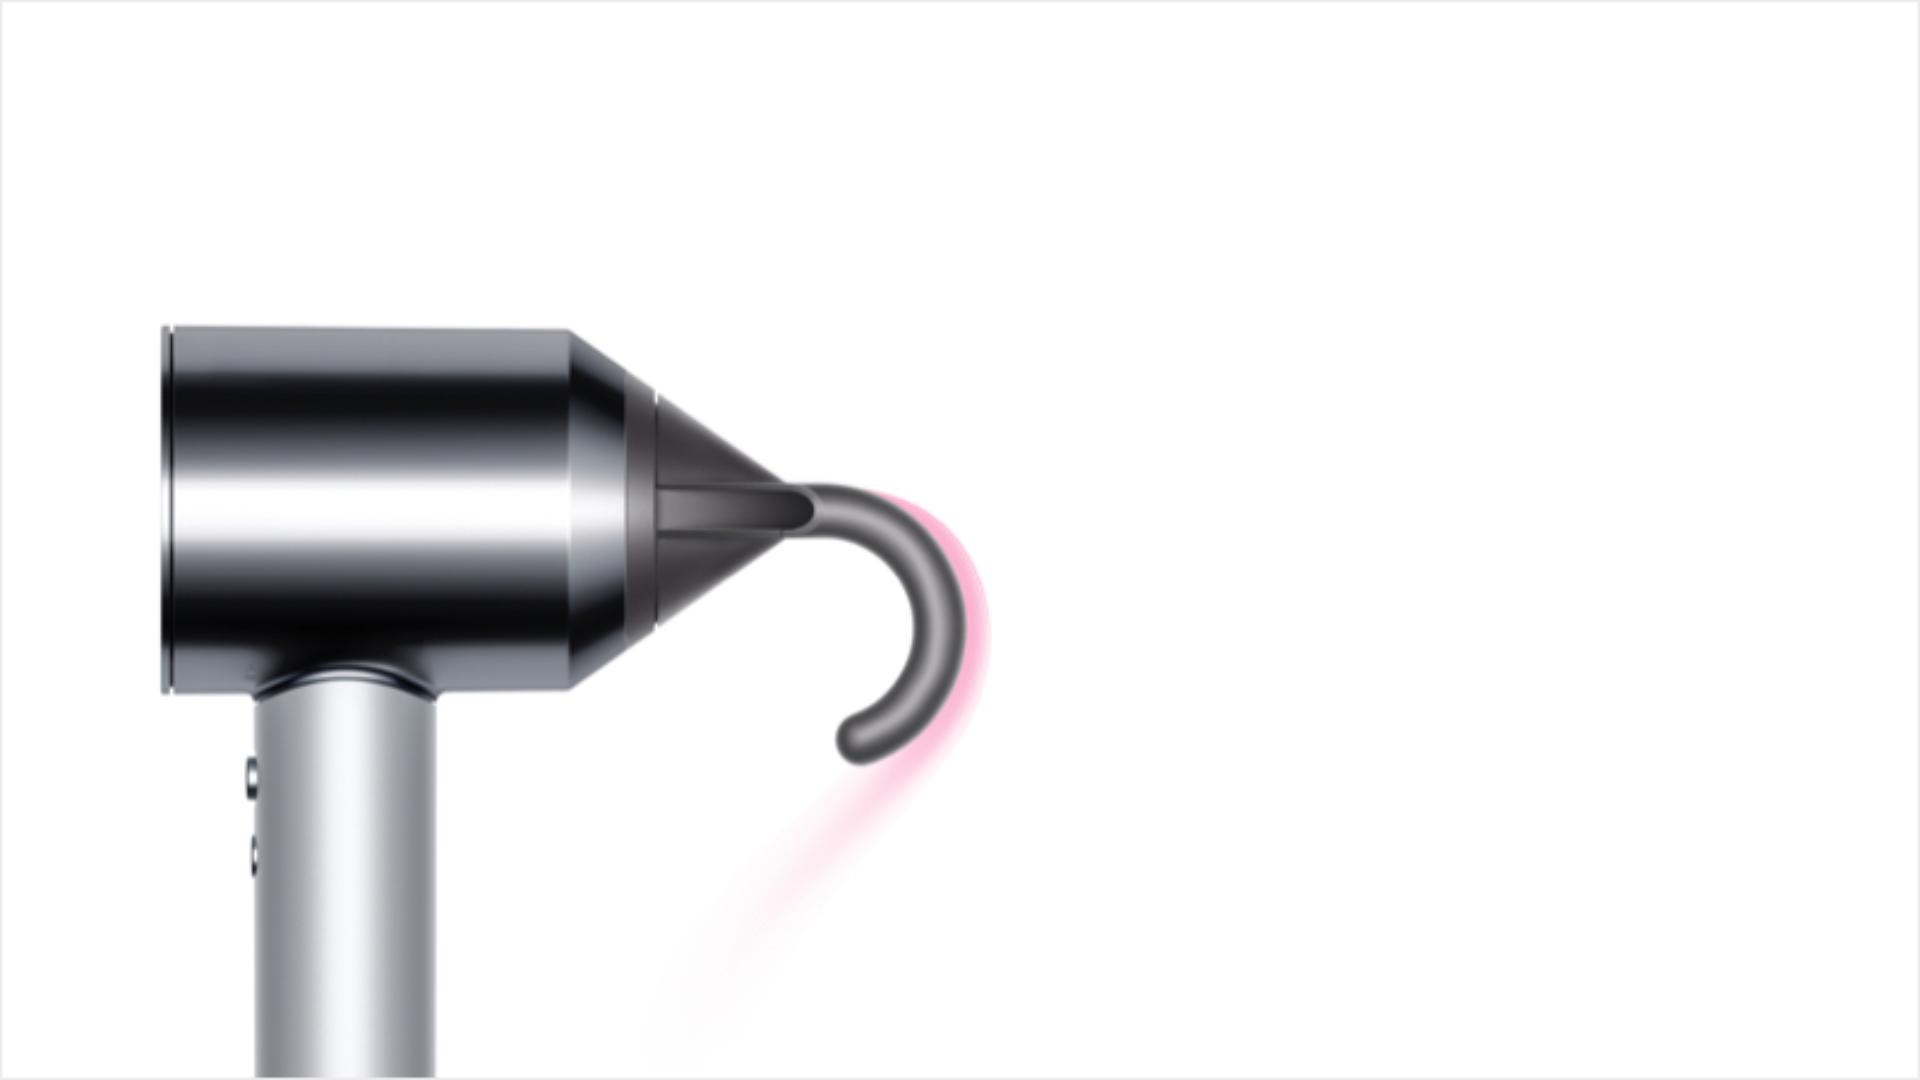 Flyaway attachment for the Dyson Supersonic hair dryer